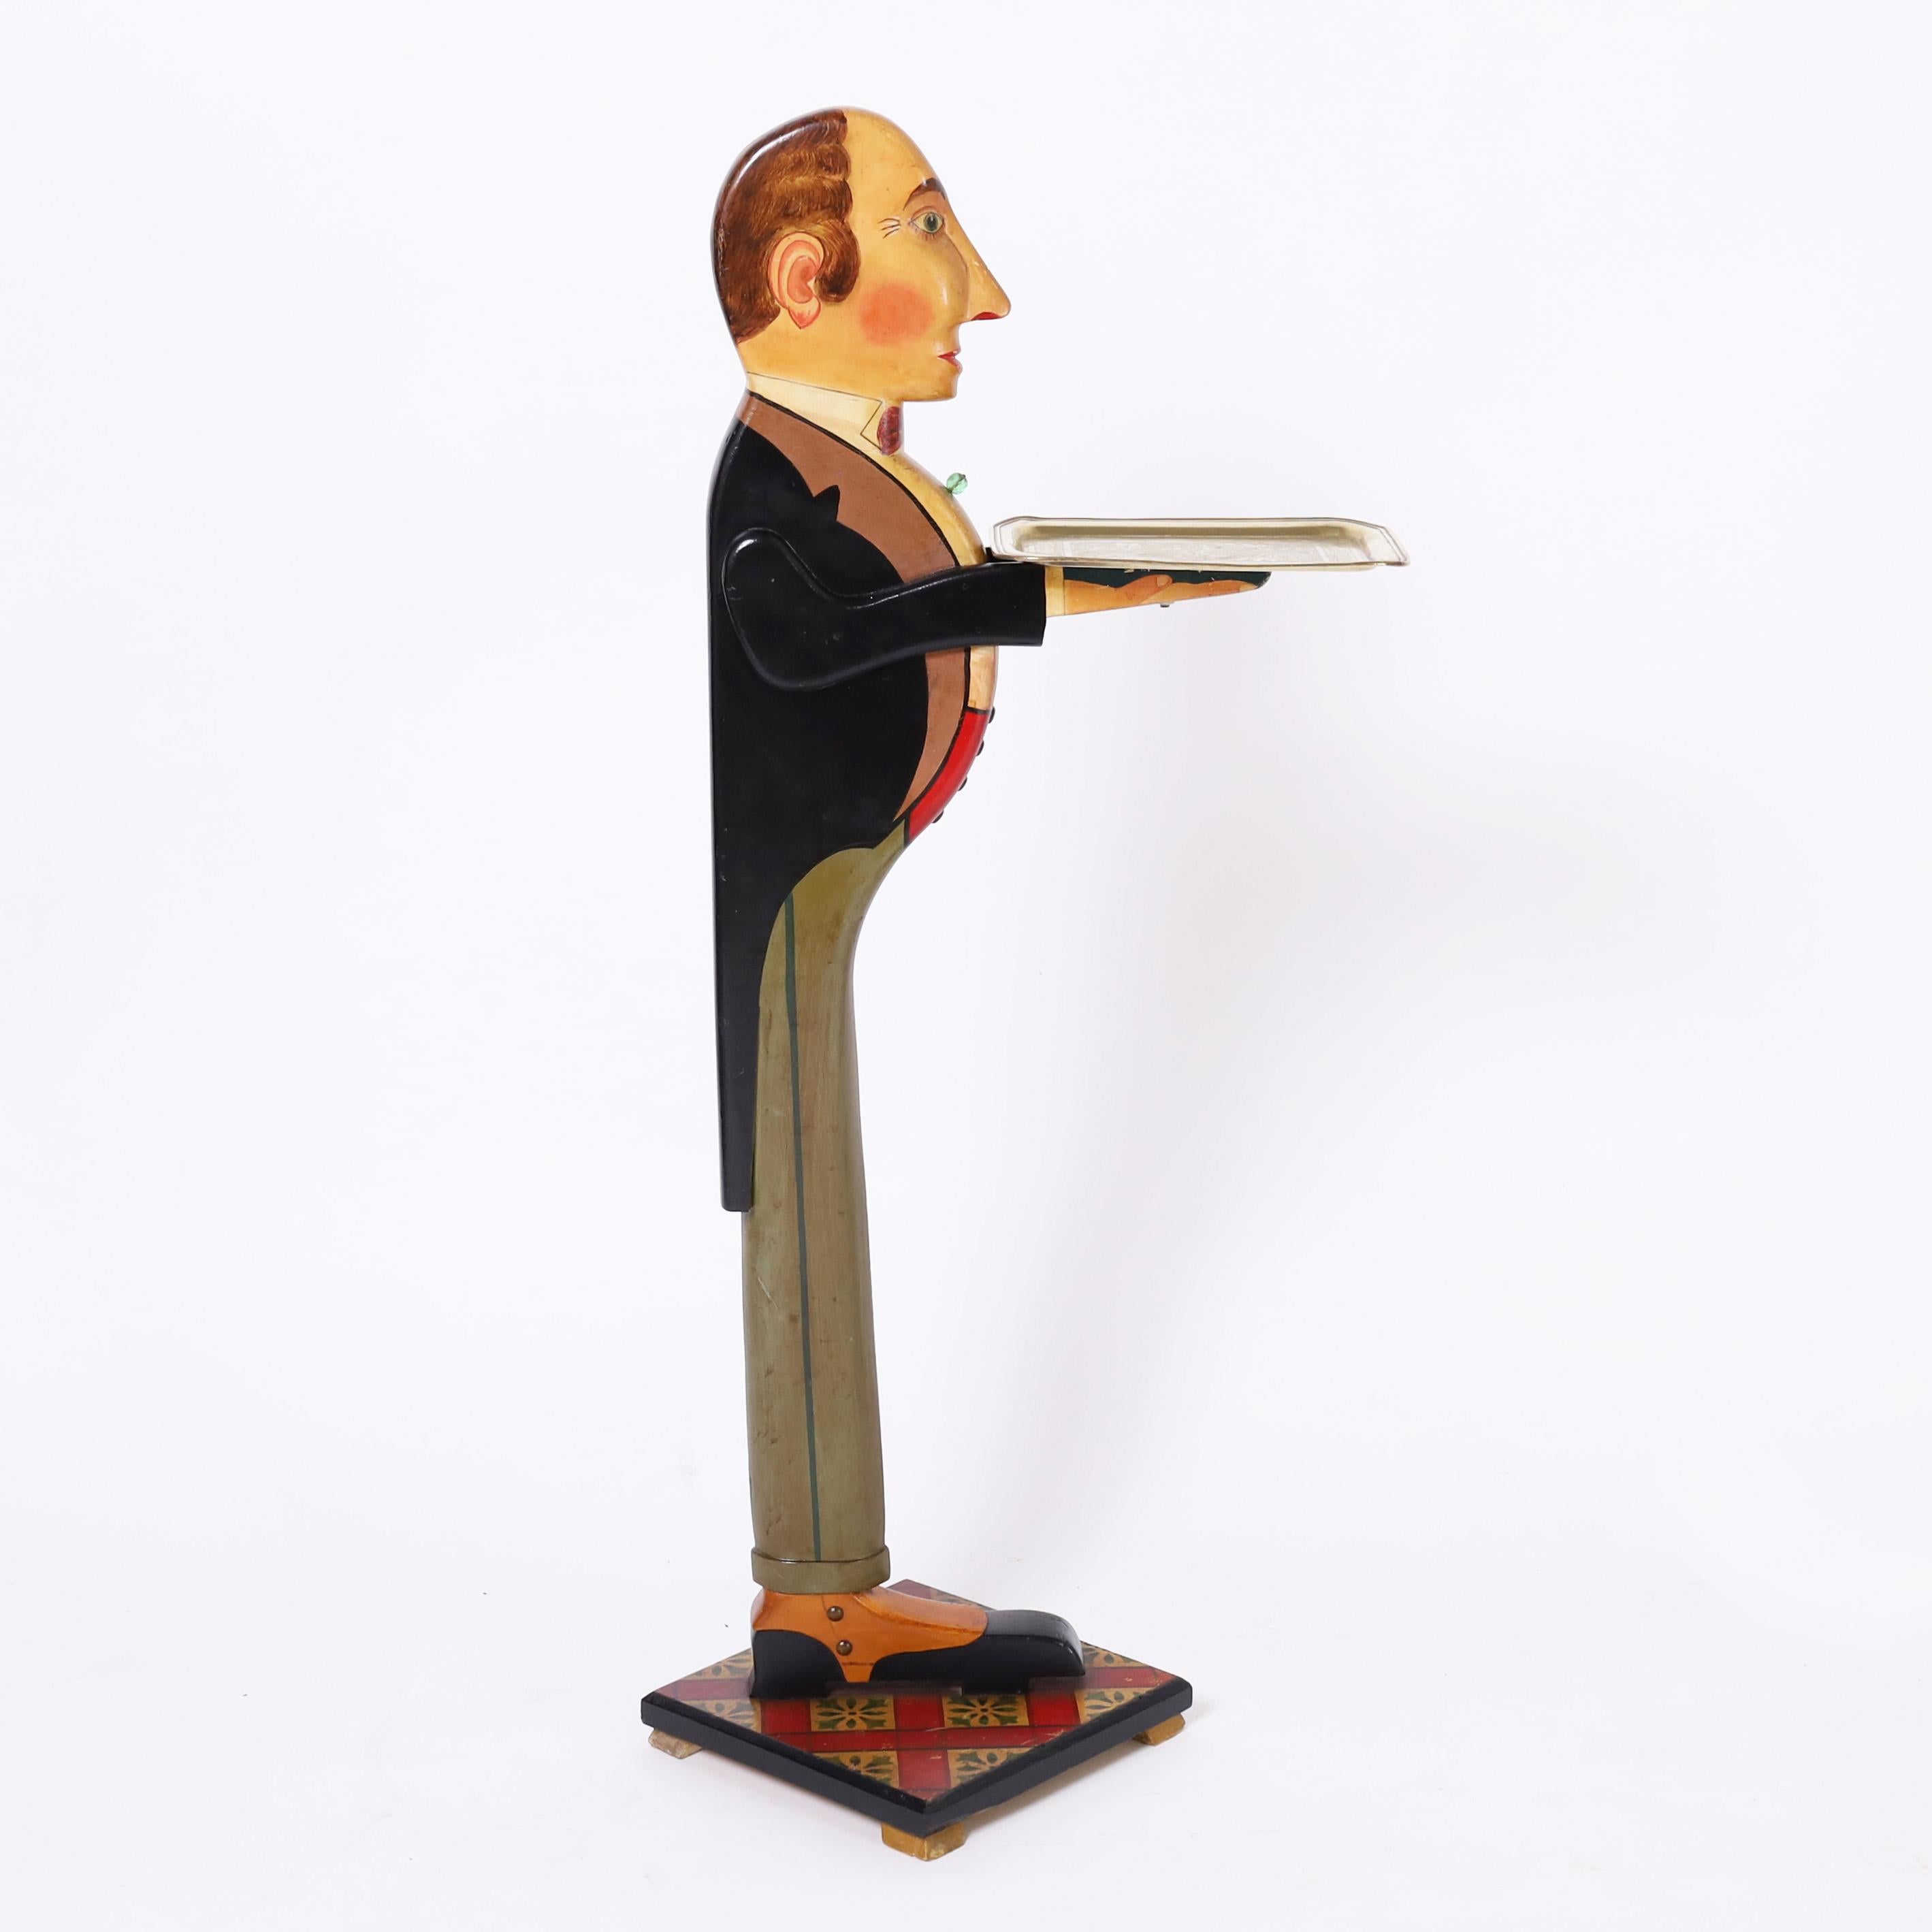 Dapper art deco standing butler with brass tray crafted in hardwood and paint decorated with cliched high collar, boutonnieres, tails and spats, faithfully ready to serve. 